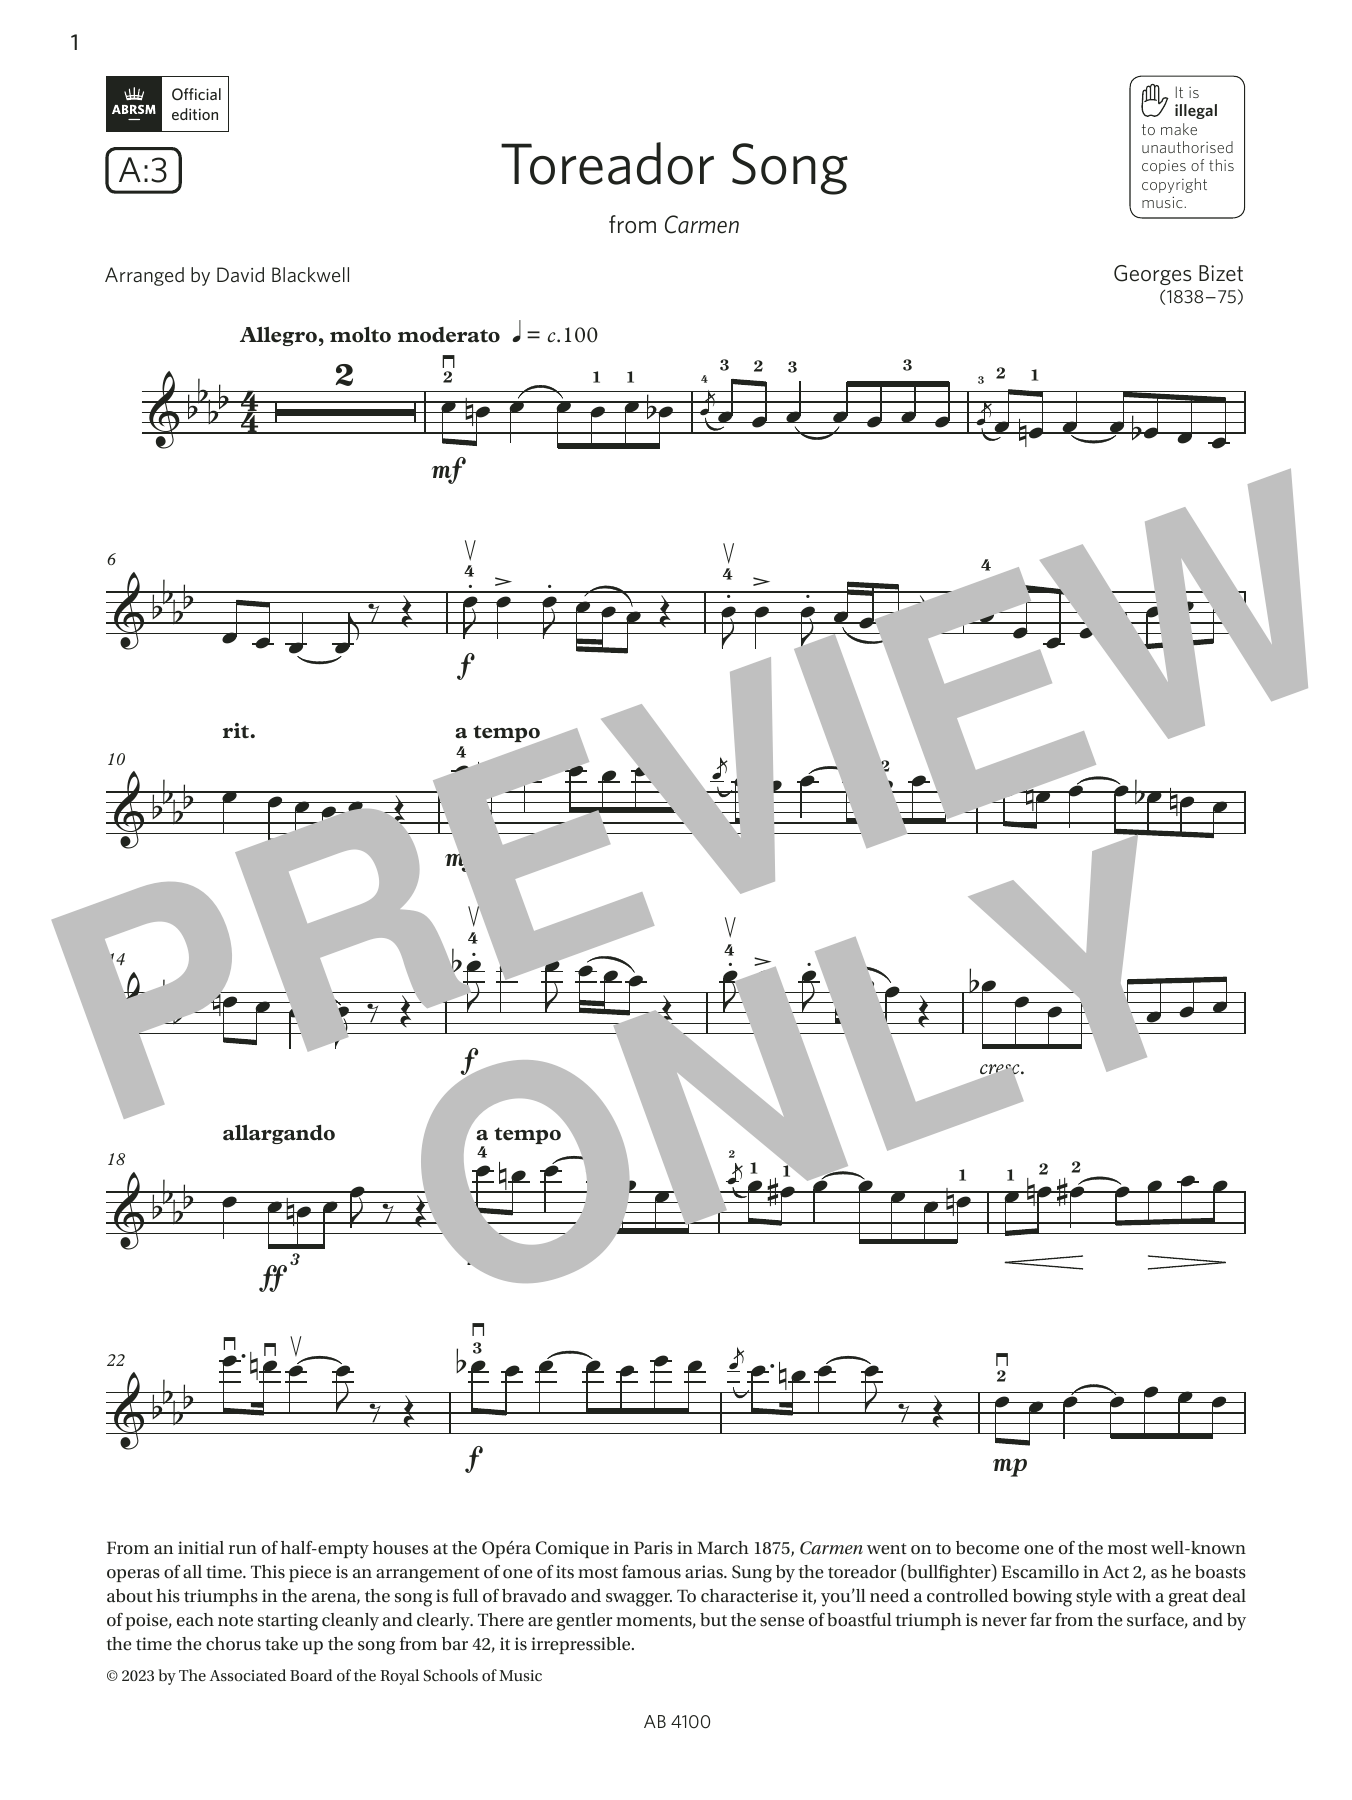 Download Georges Bizet Toreador Song (Grade 6, A3, from the AB Sheet Music